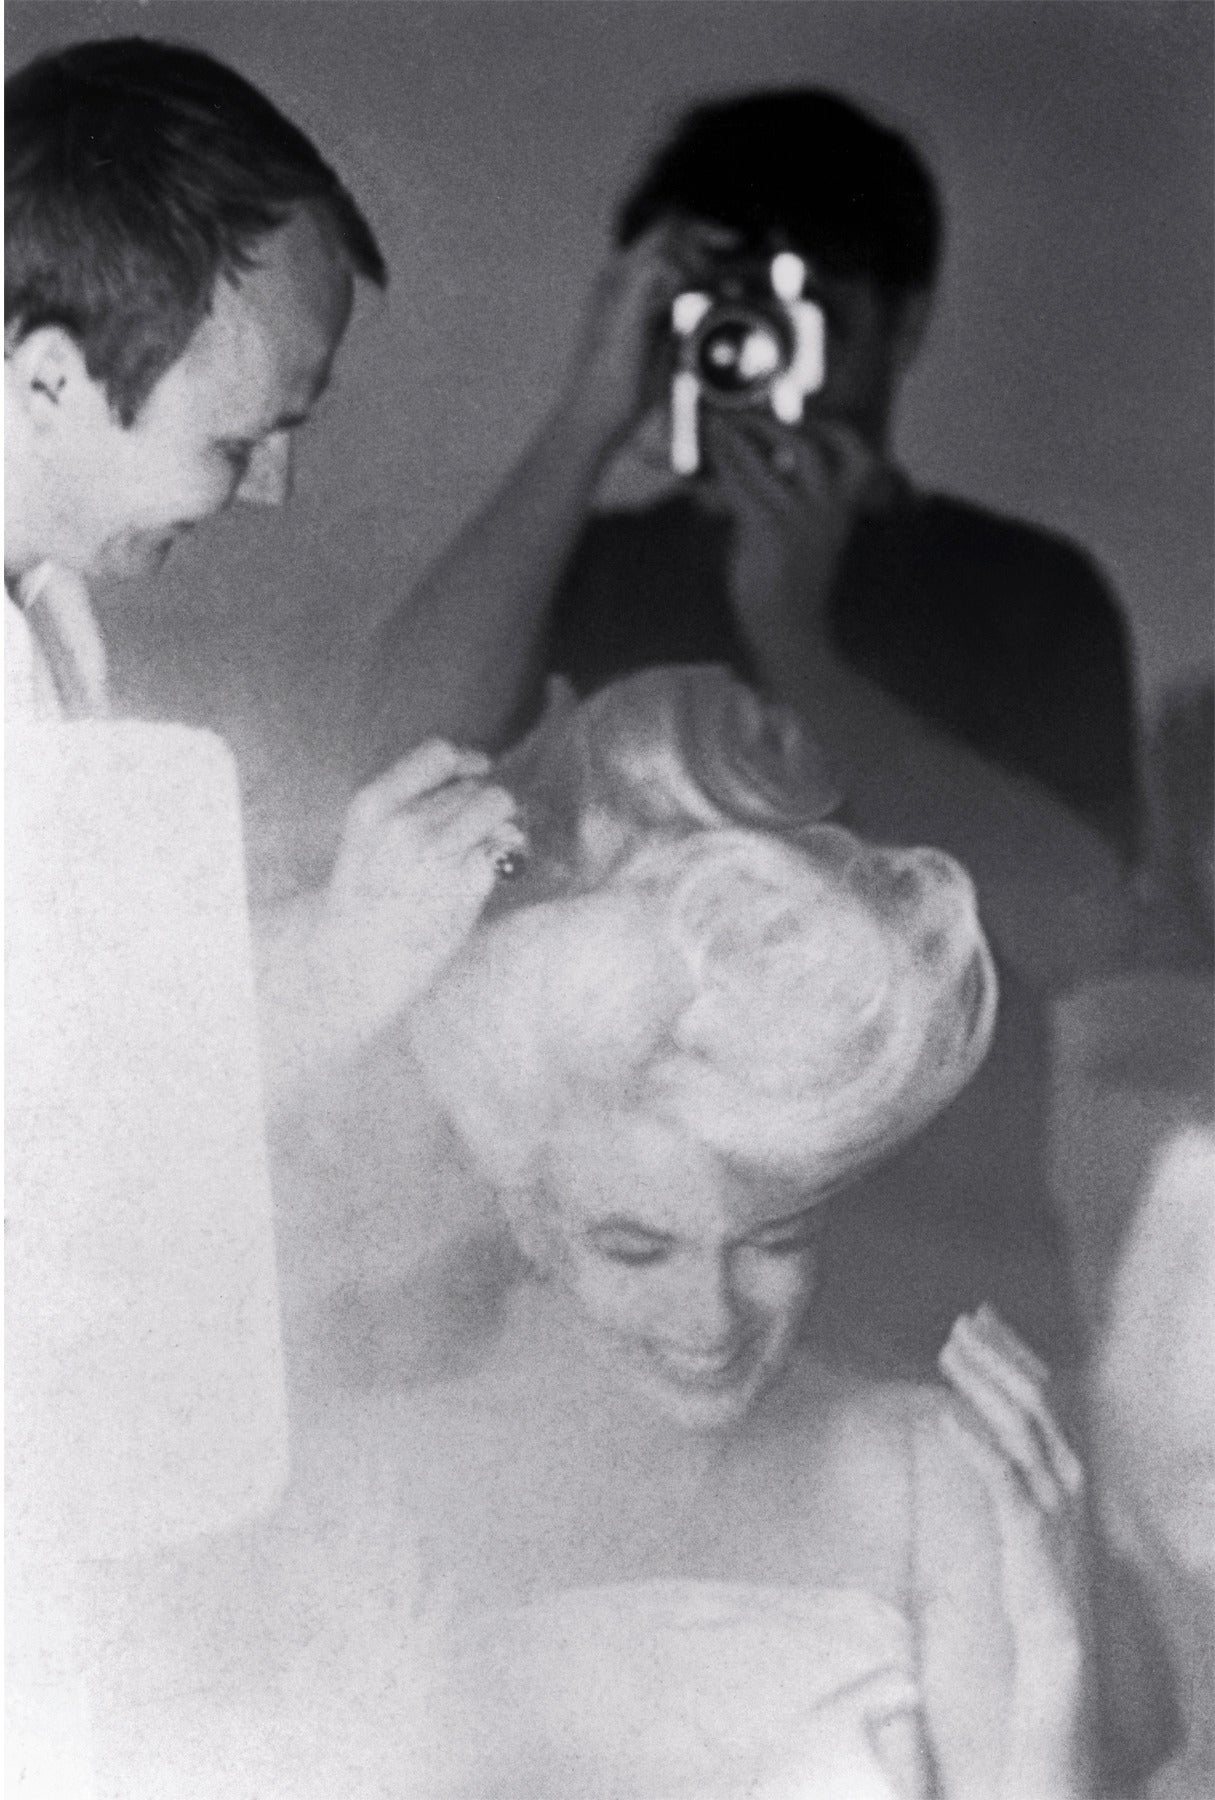 Marilyn Monroe: From "The Last Sitting Ⓡ" - Photograph by Bert Stern